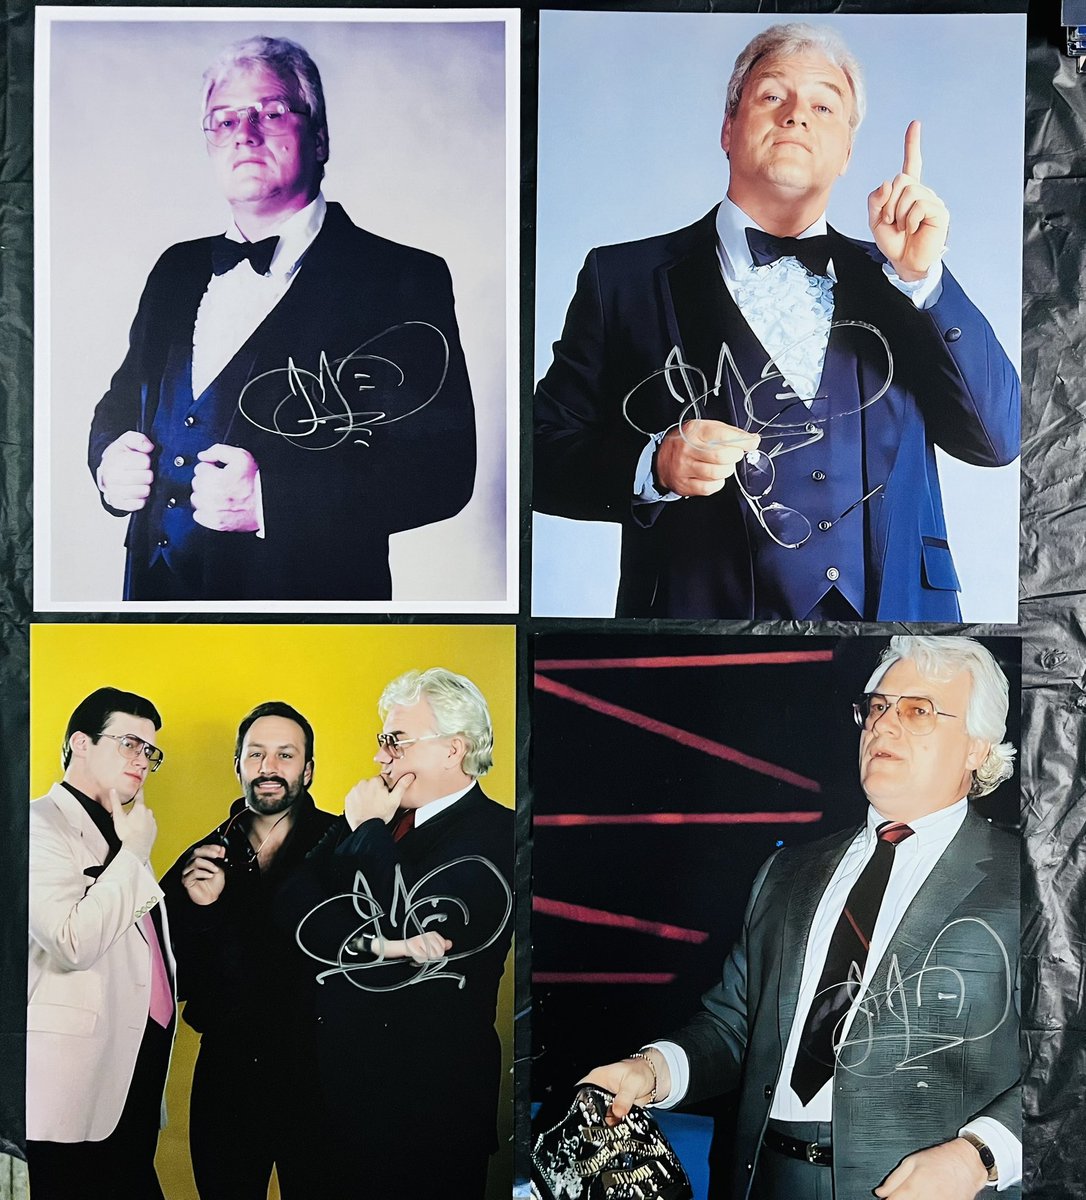 We have a few extra JJ Dillon signed 8X10s from last weekend’s @80sWrestlingCon. Please message us if you are interested in one. Thank you!